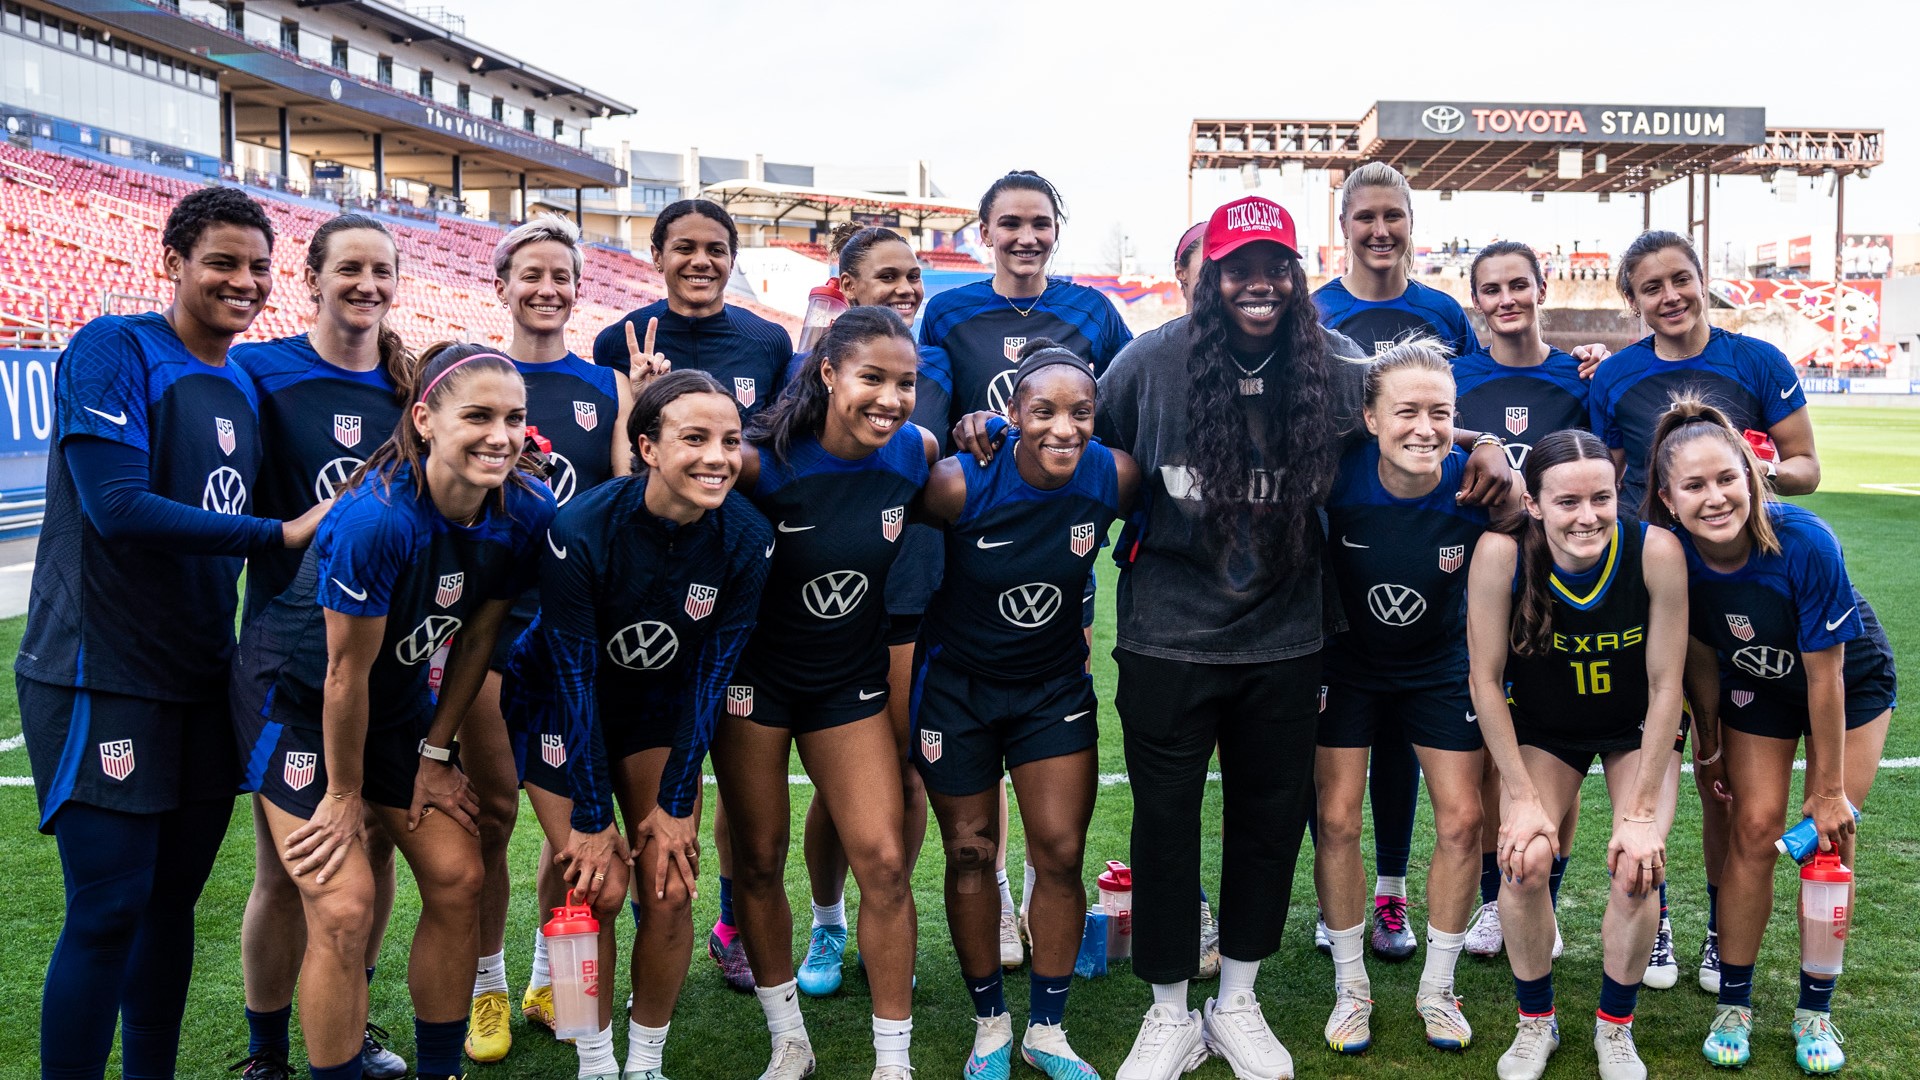 Ogunbowale, who is a former high school standout soccer player, watched USWNT train, and also took to the pitch to show off her skills.